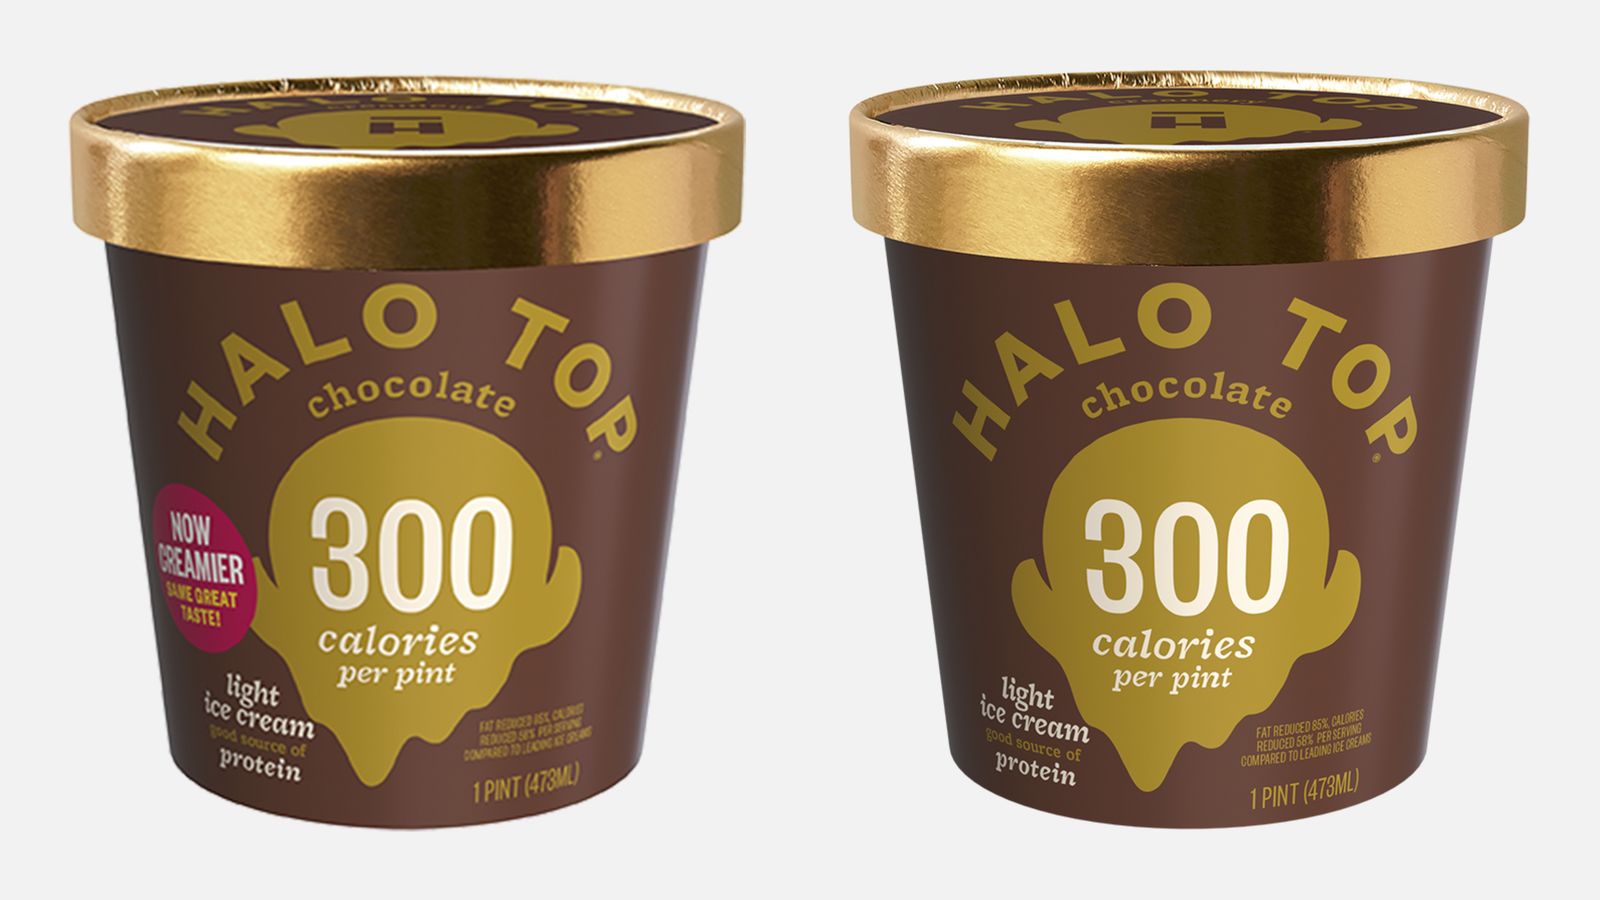 Top's new ice cream lets you skip the microwave thaw | CNN Business